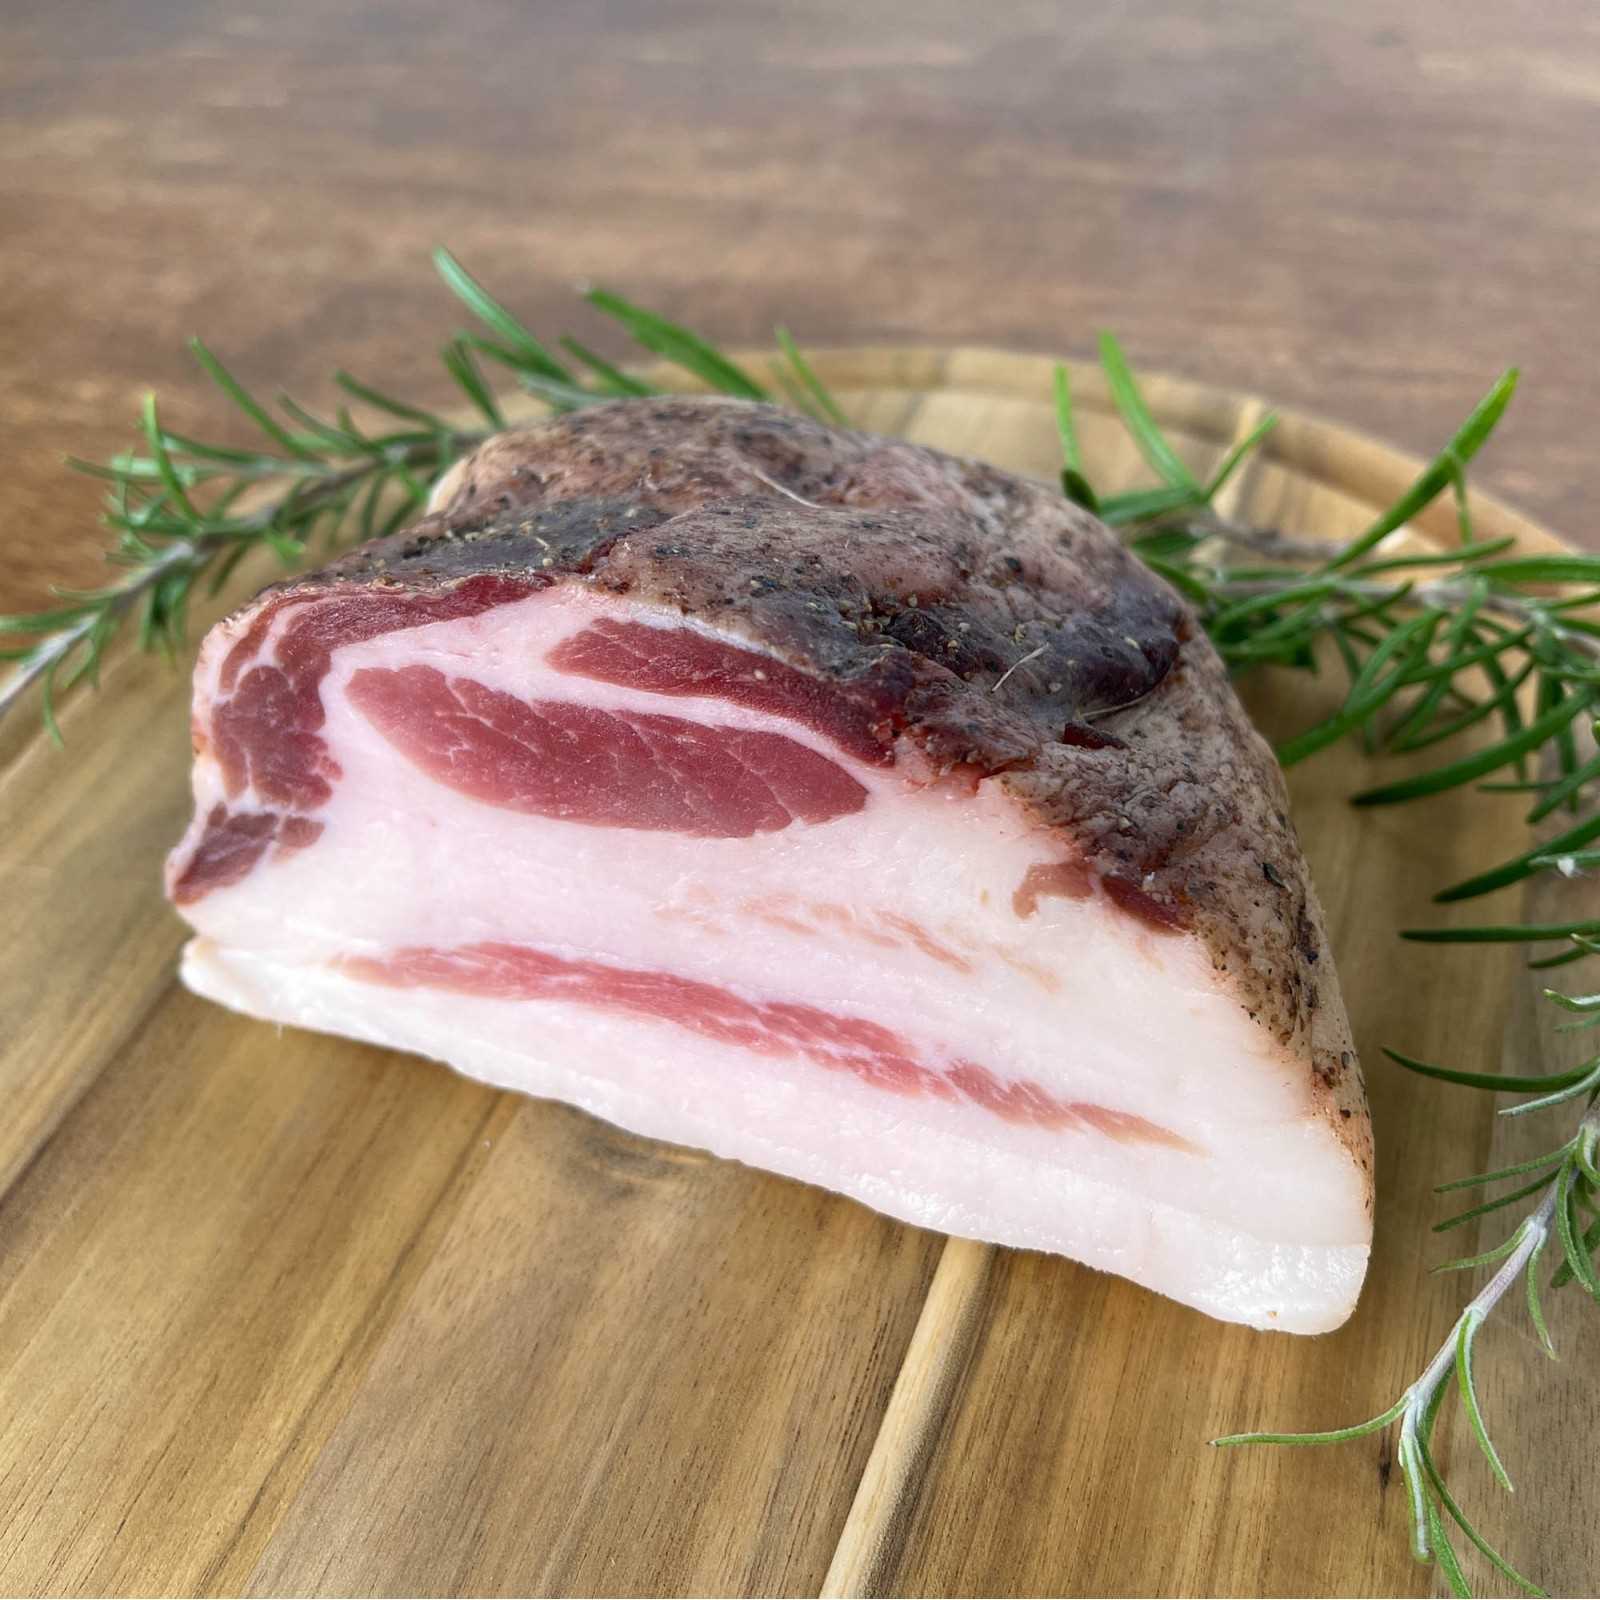 The Tuscan Pork Jowl (Guanciale) is one of the excellences of the Tuscan territory that boasts an ancient tradition and which still today can be enjoyed with pleasure in many recipes of ancient origin and modern combinations. In fact, it is a very versatile salami that lends itself to being enhanced both raw and cooked in sauces and soups. The quality of the product is guaranteed by the use of Tuscan pigs raised in certified farms that offer delicious meat. it is used in various recipes and sauces: pasta alla carbonara, gricia and amatriciana are the most famous.